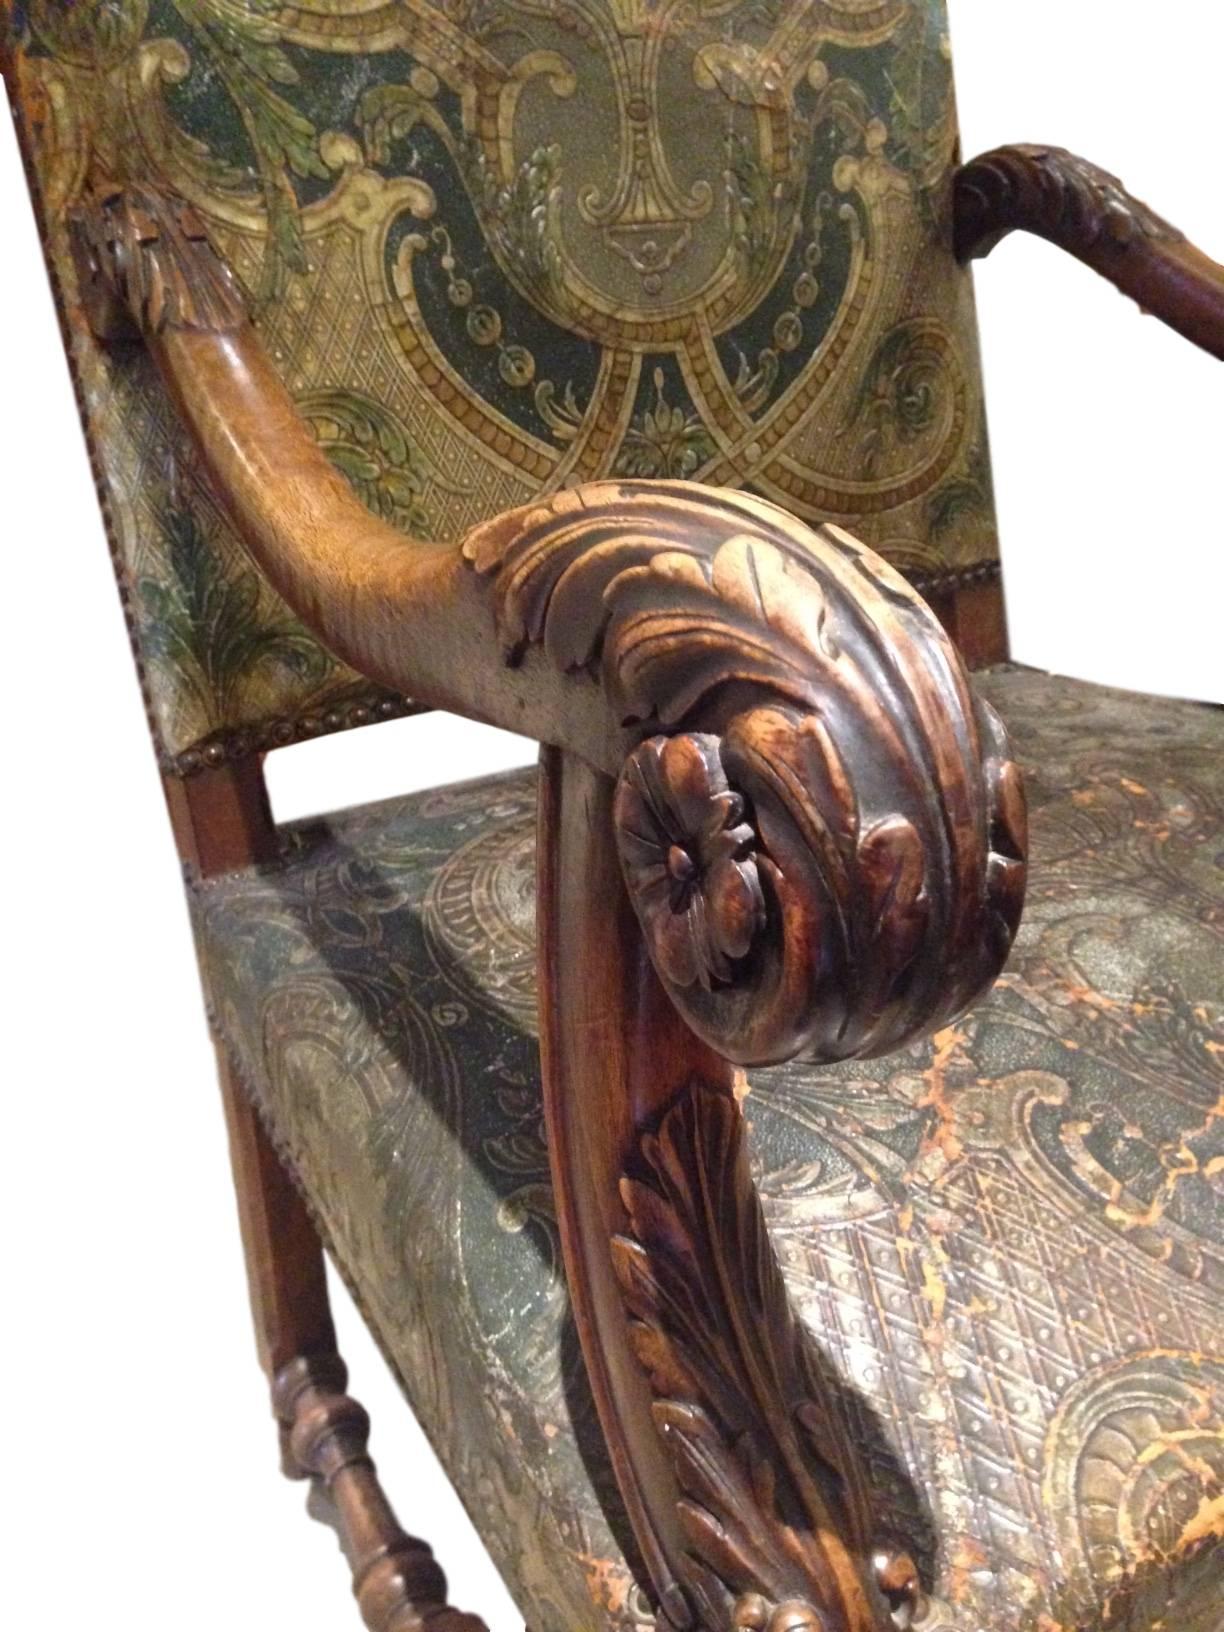 This fantastic 19th century French carved walnut throne armchair has the original embossed and painted leather from the 1870s and contains nail head trim. The wood carving along the armrests and legs are phenomenal and in amazing condition. The